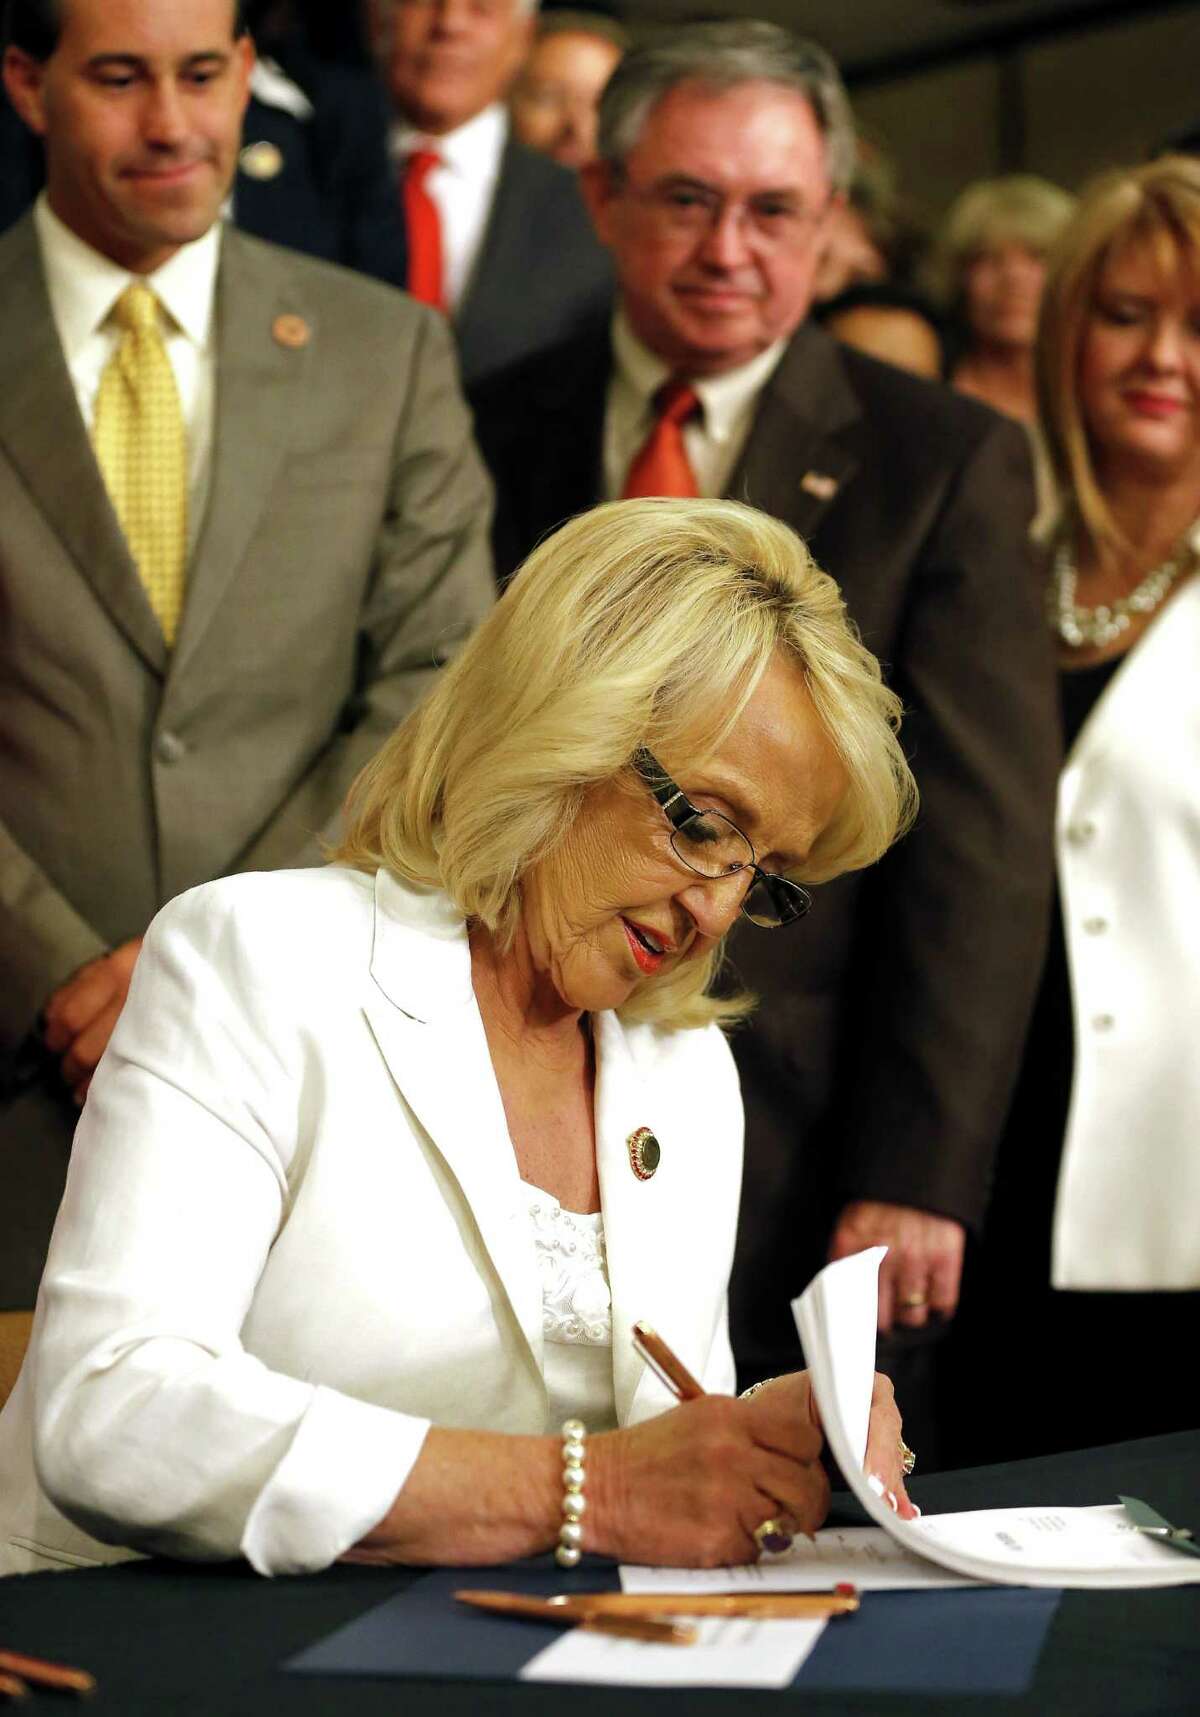 Arizona takes a logical path on Medicaid expansion